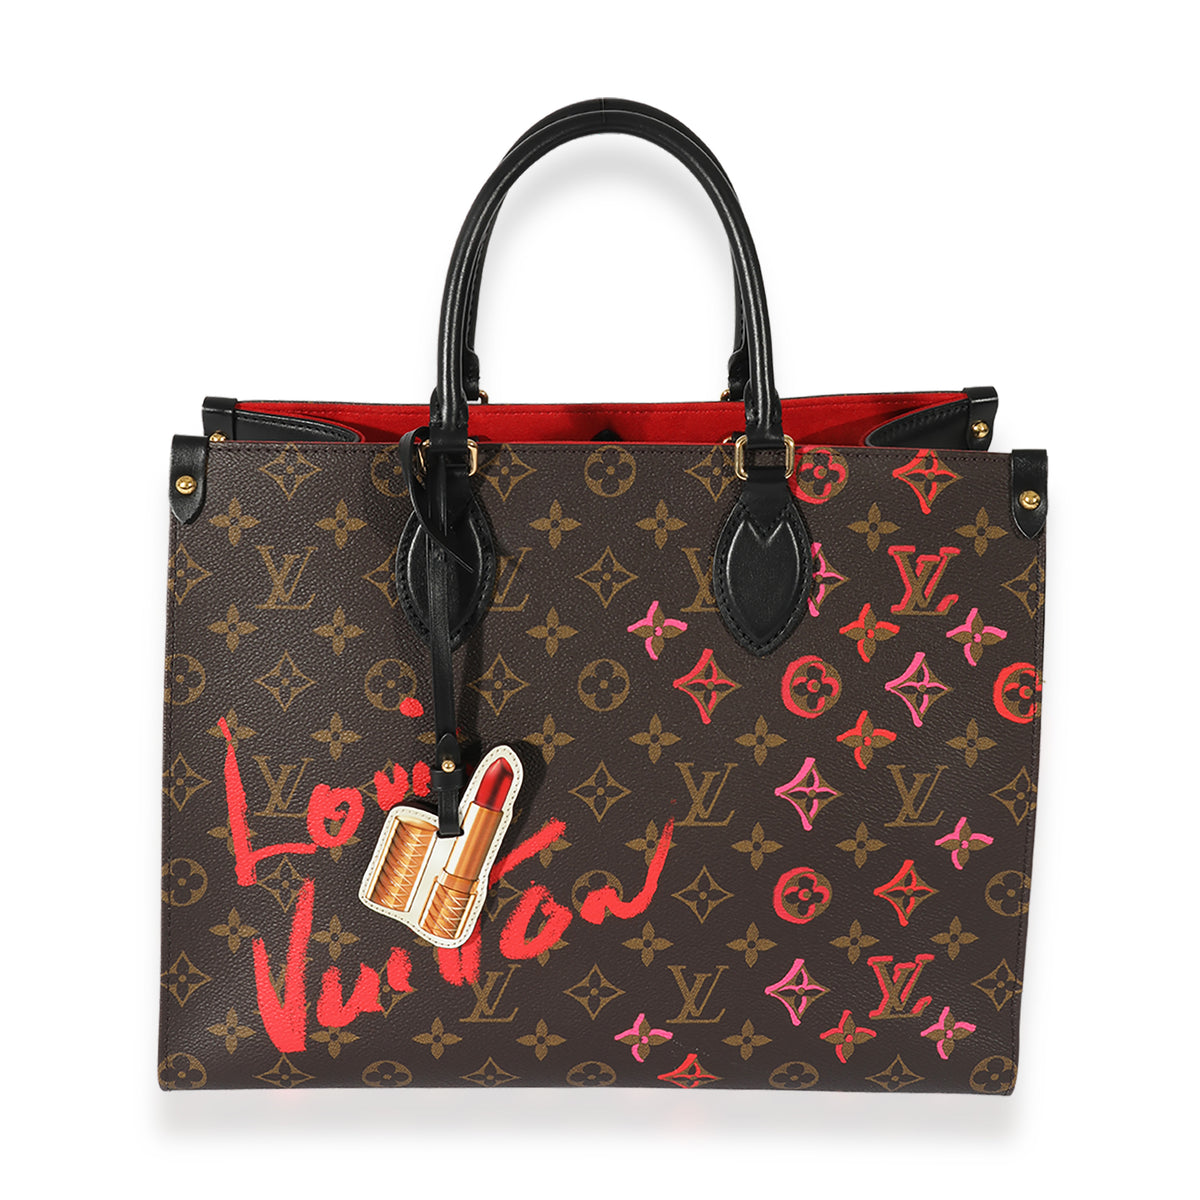 In love with LV, Style